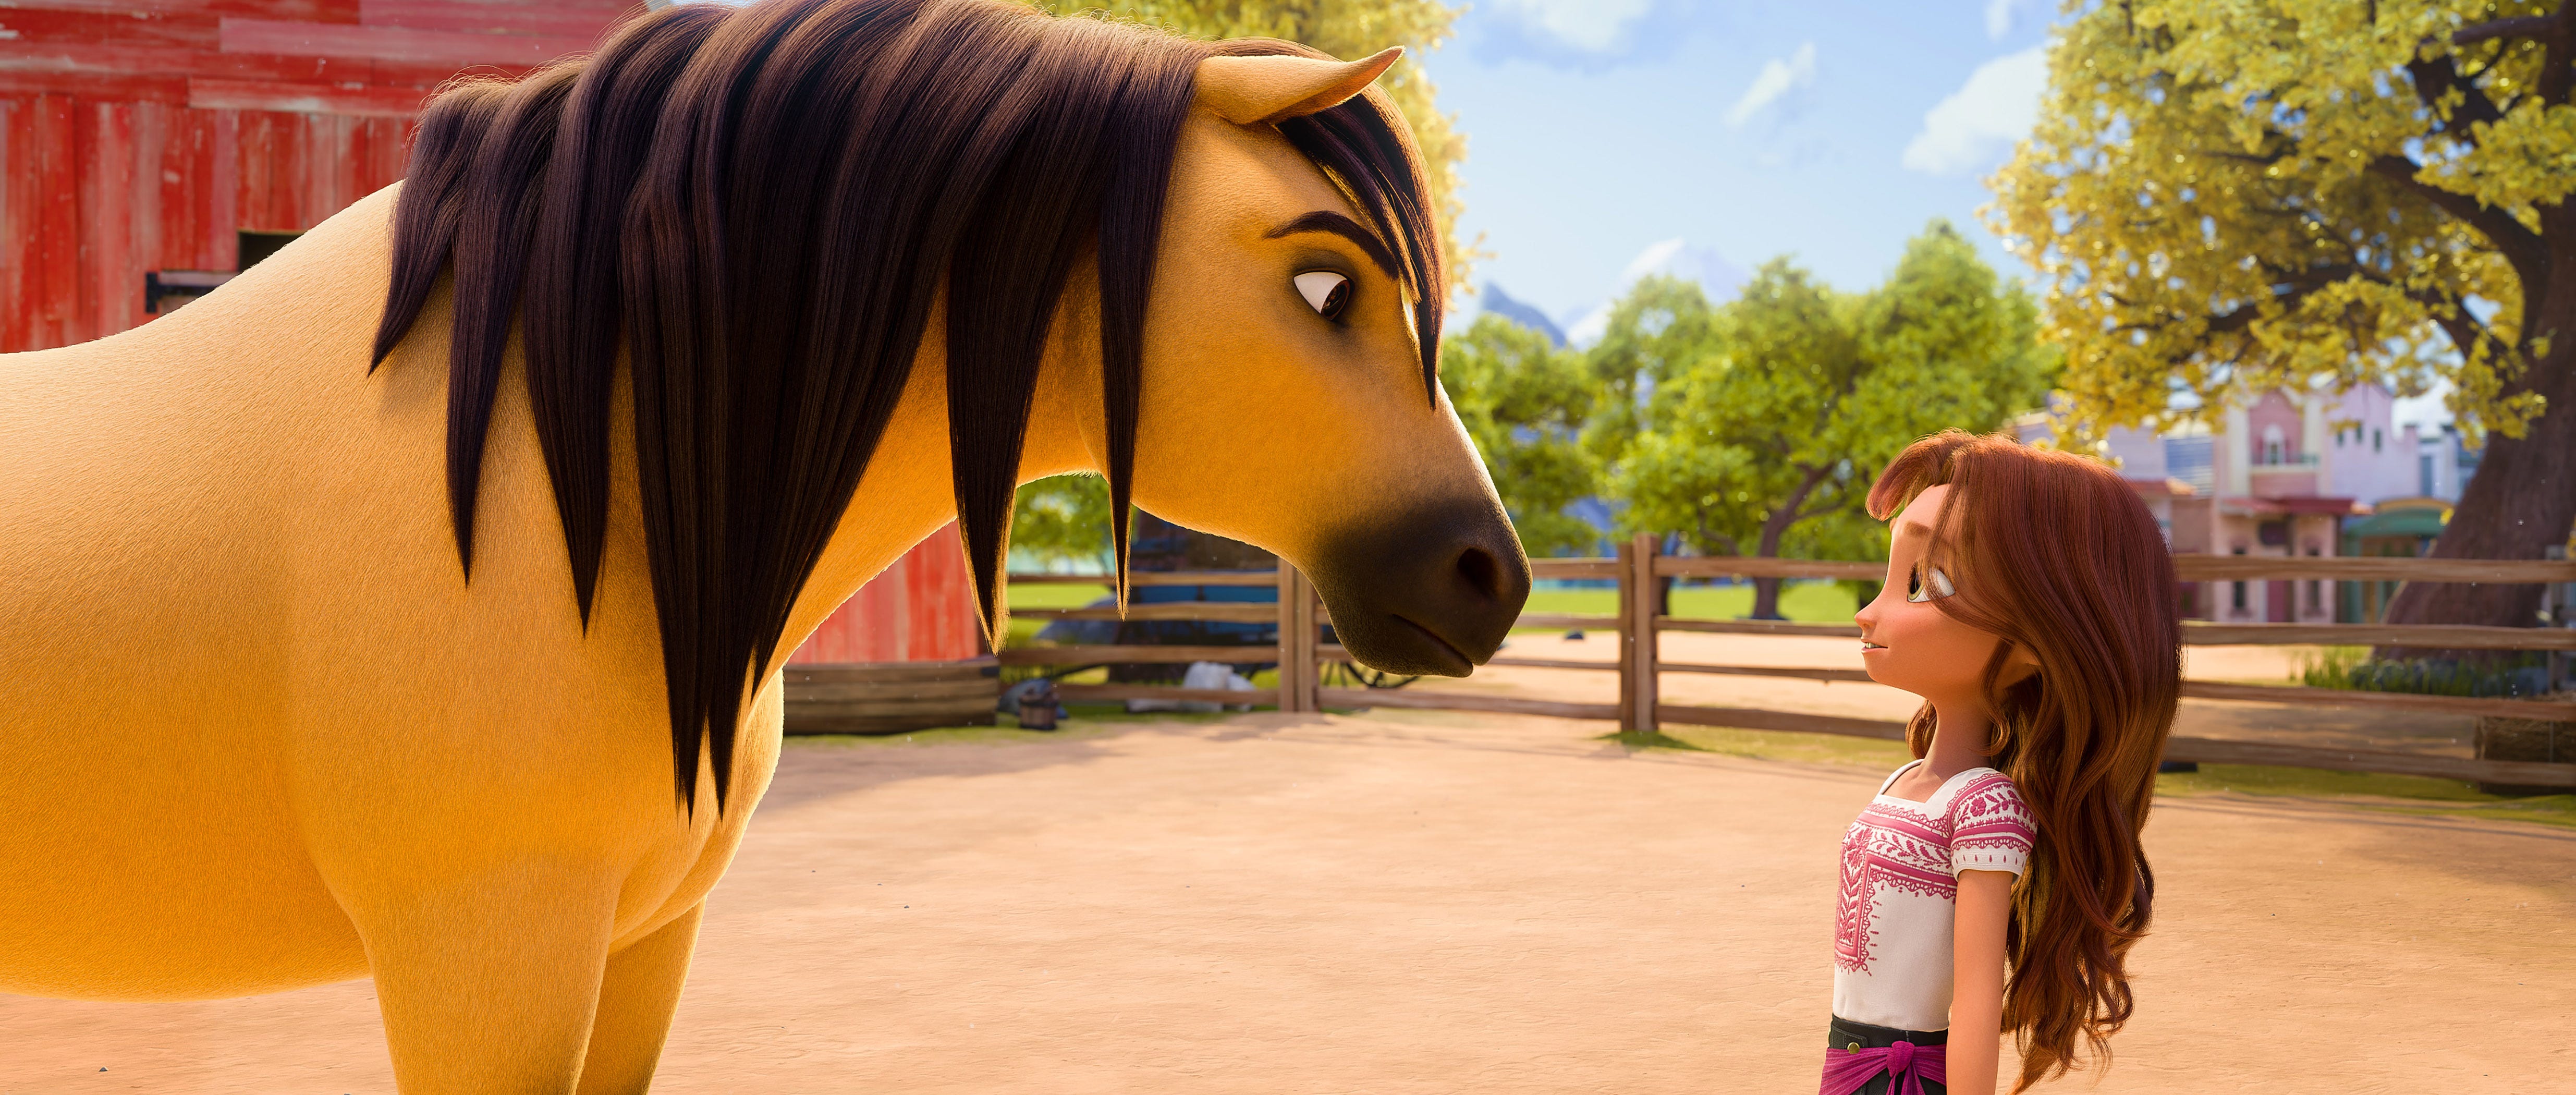 Spirit Untamed' movie is a sweet animated horse tale